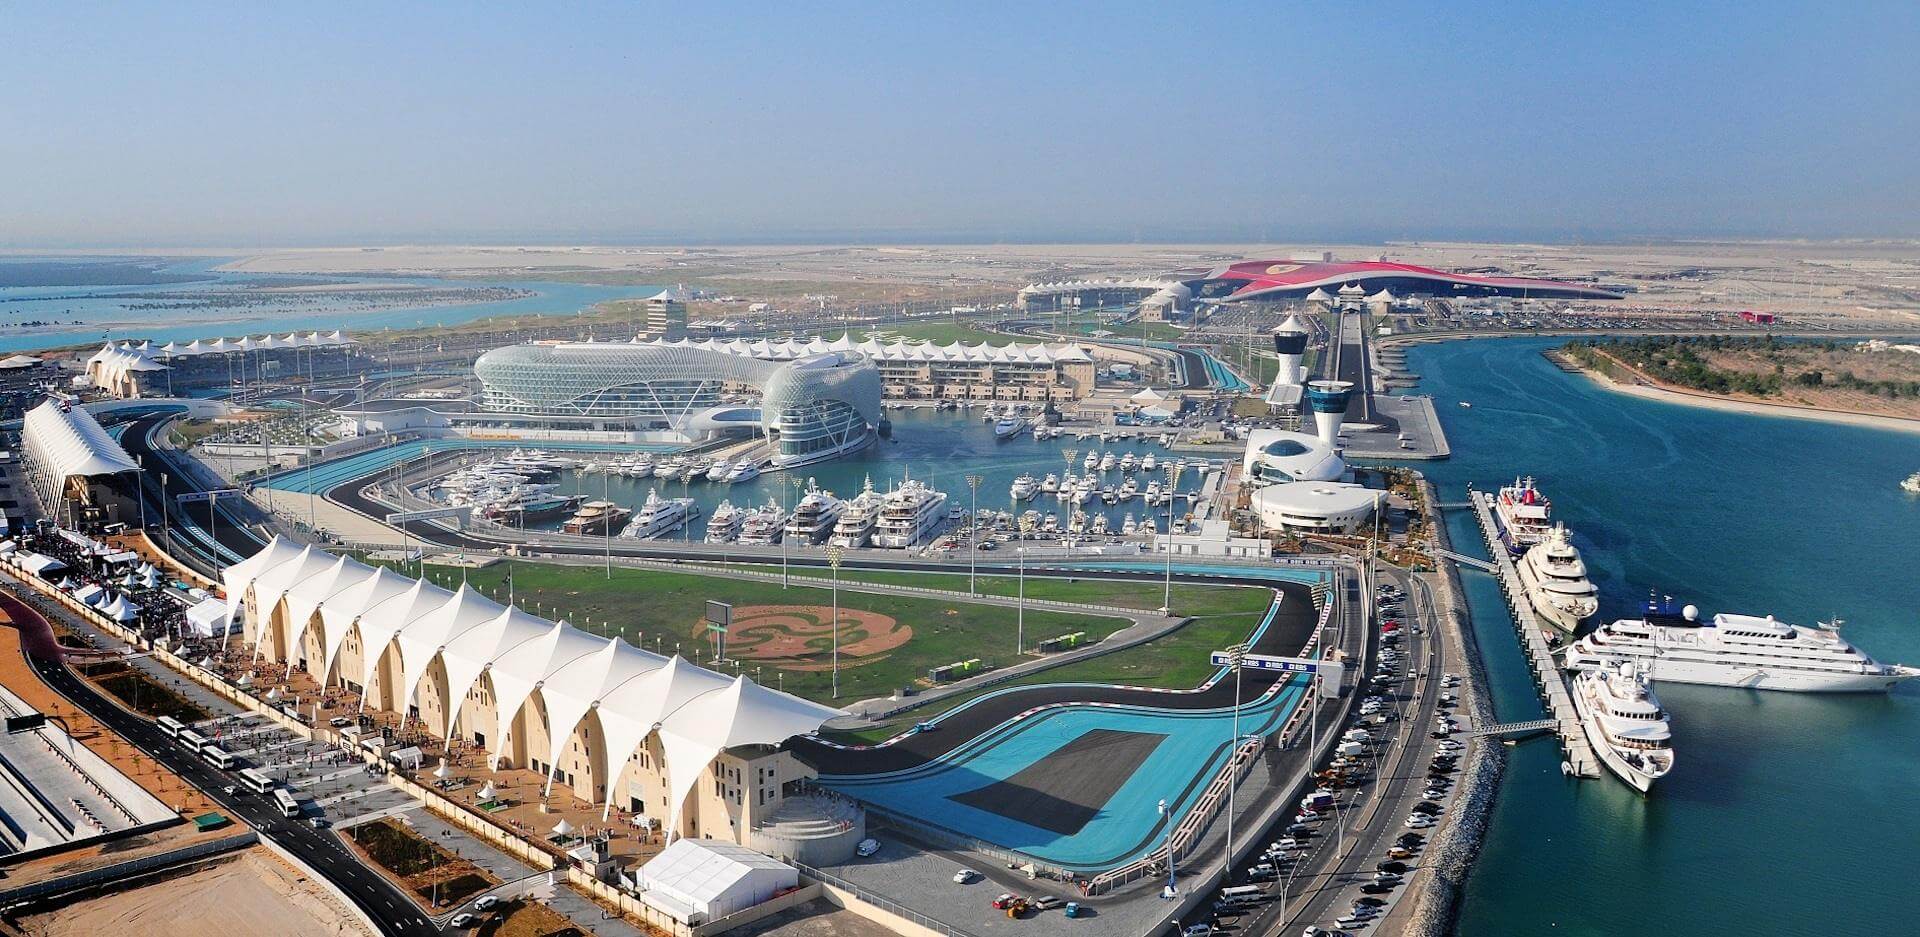 Airlines E-Ticket to Abu Dhabi